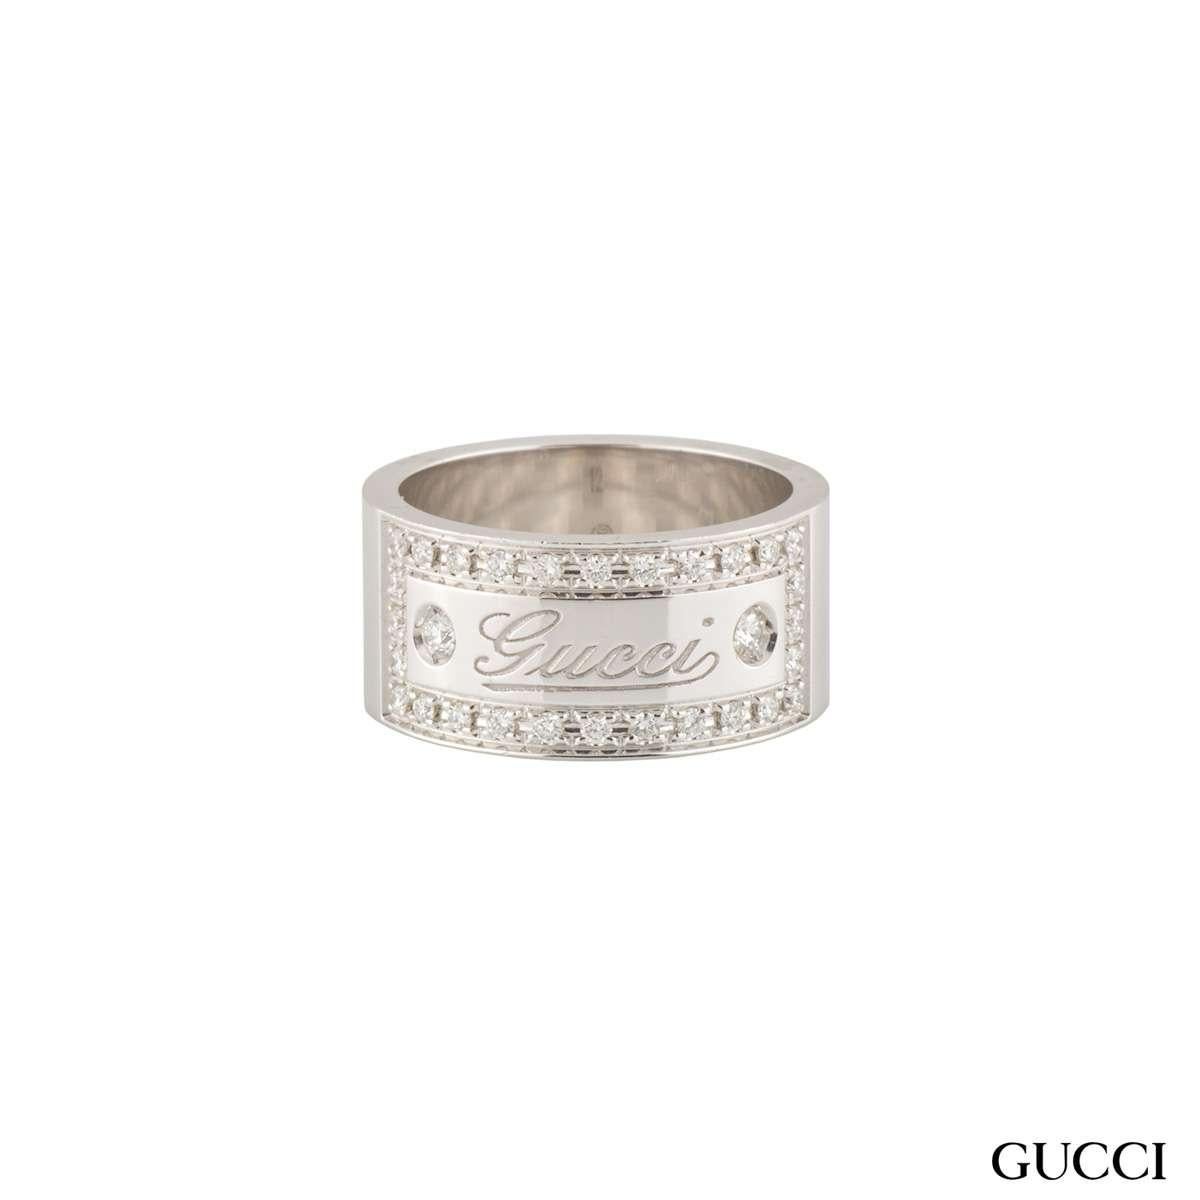 A beautiful 18k white gold diamond Gucci ring. The ring comprises of a 9mm flat court band with the 'Gucci' logo embossed in the centre. The logo has a box around set with diamonds with a weight of approximately 0.49ct, G colour and VS+ clarity. The